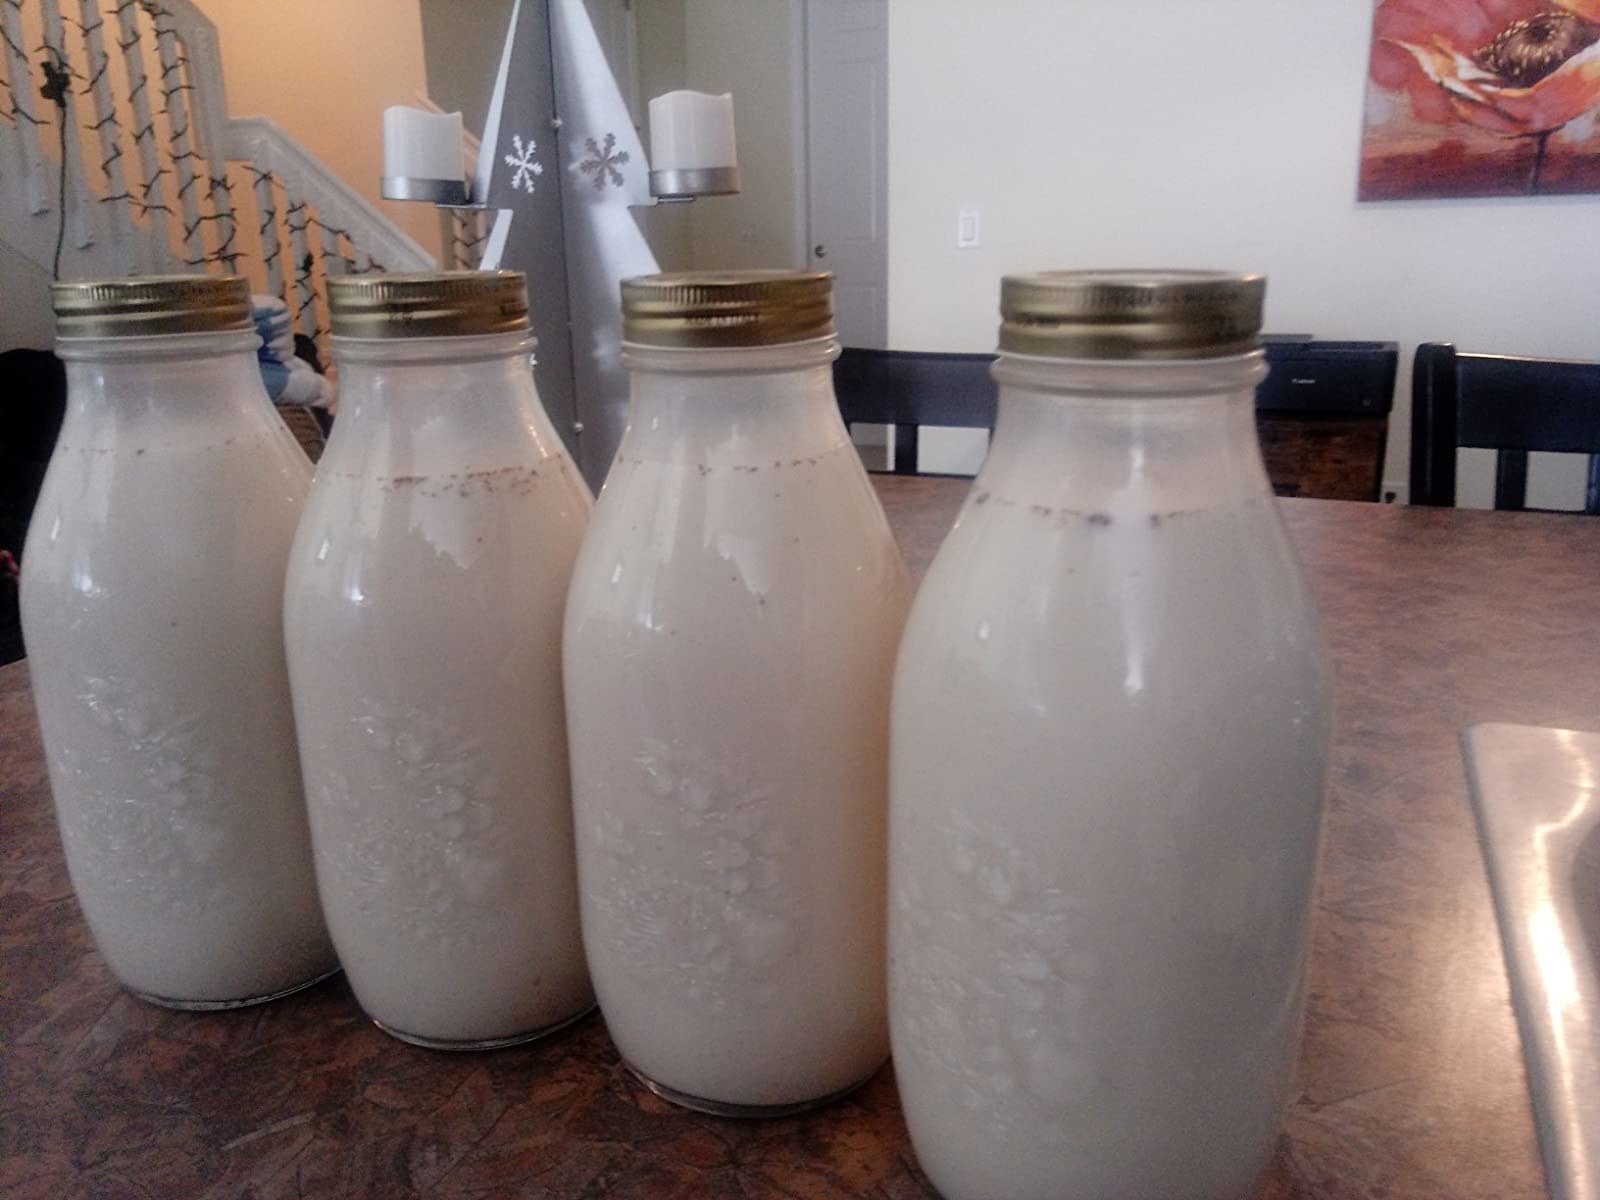 A reviewer photo of four of the milk jugs filled with egg nog, with the lids screwed on